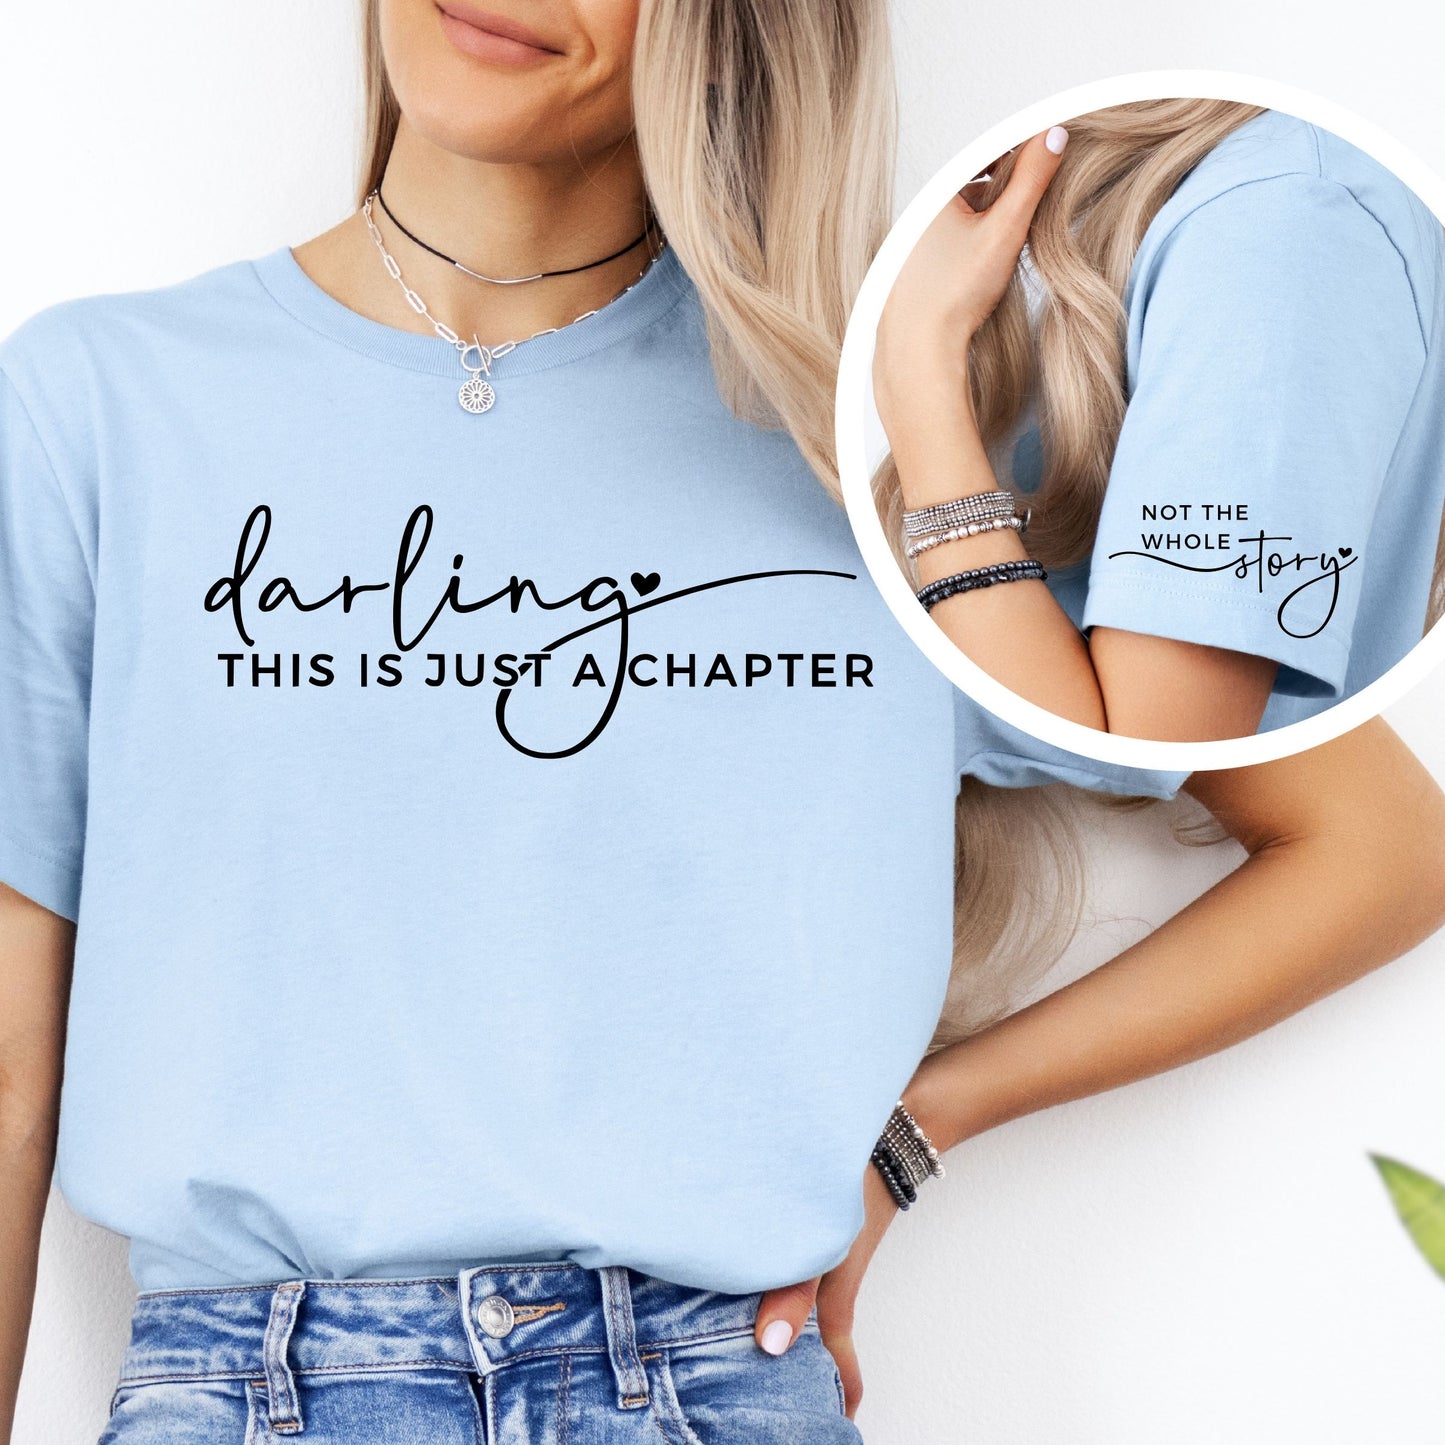 Darling This Is Just A Chapter T-Shirt - Mardonyx T-Shirt XS / Baby Blue